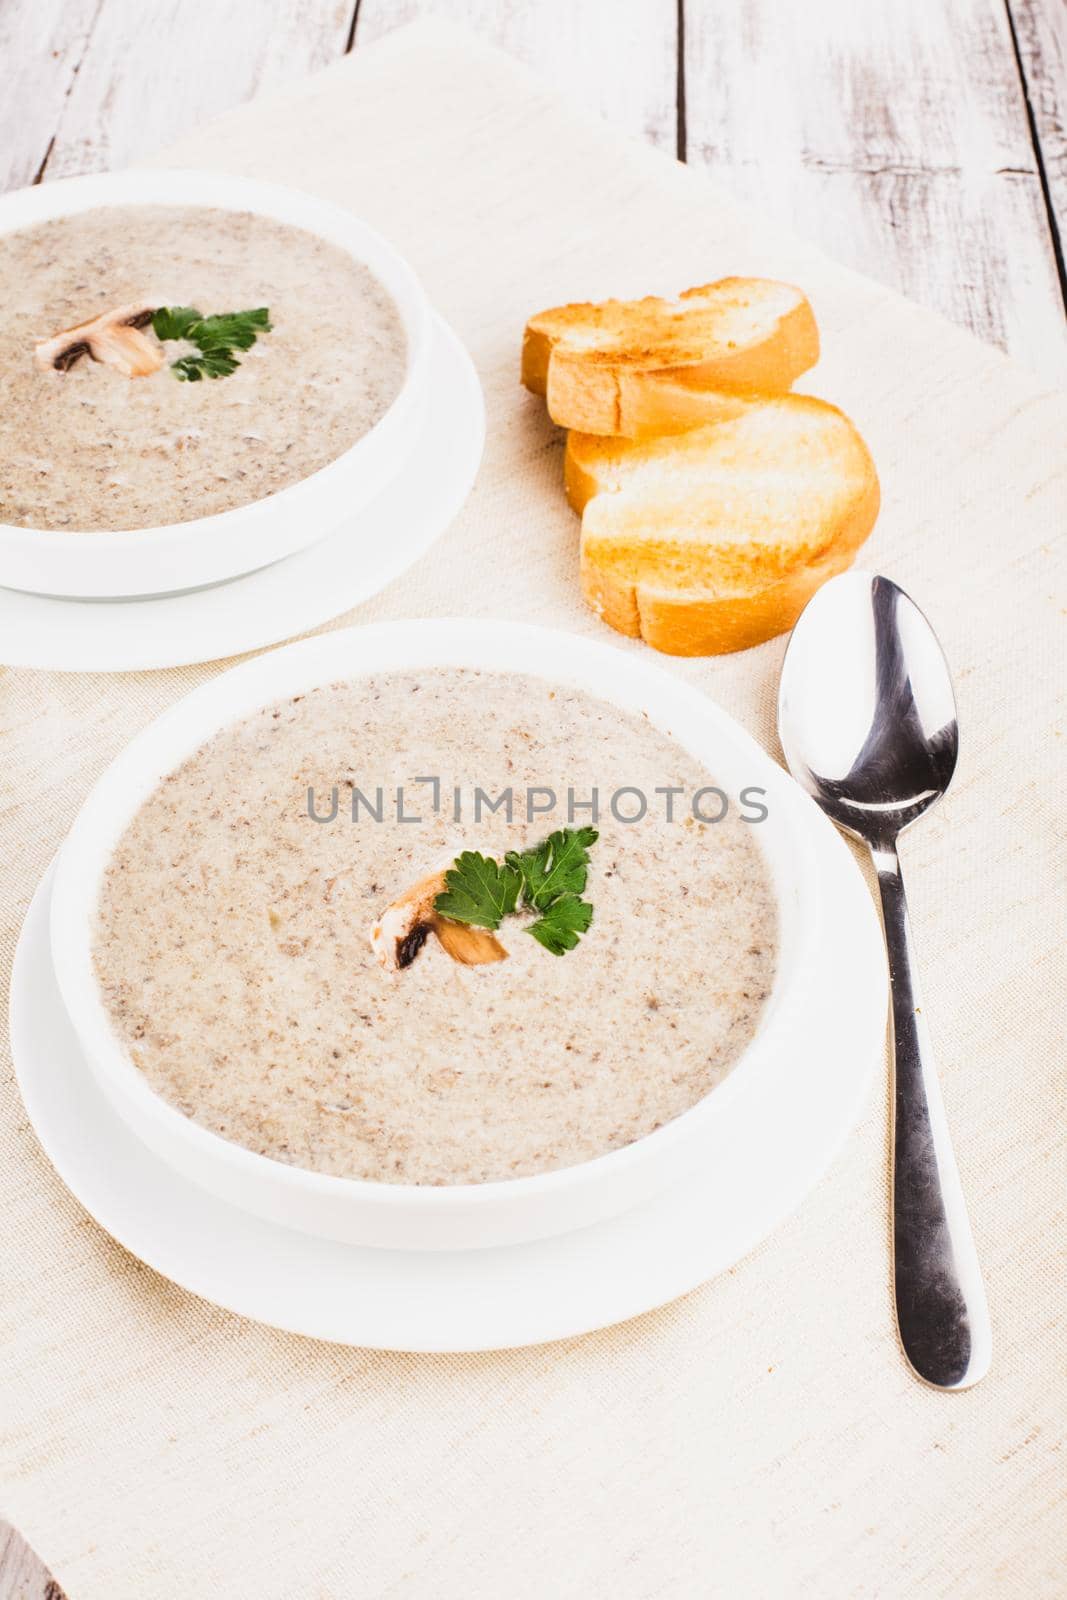 mushrooms cream soup with croutons - dried white loaf